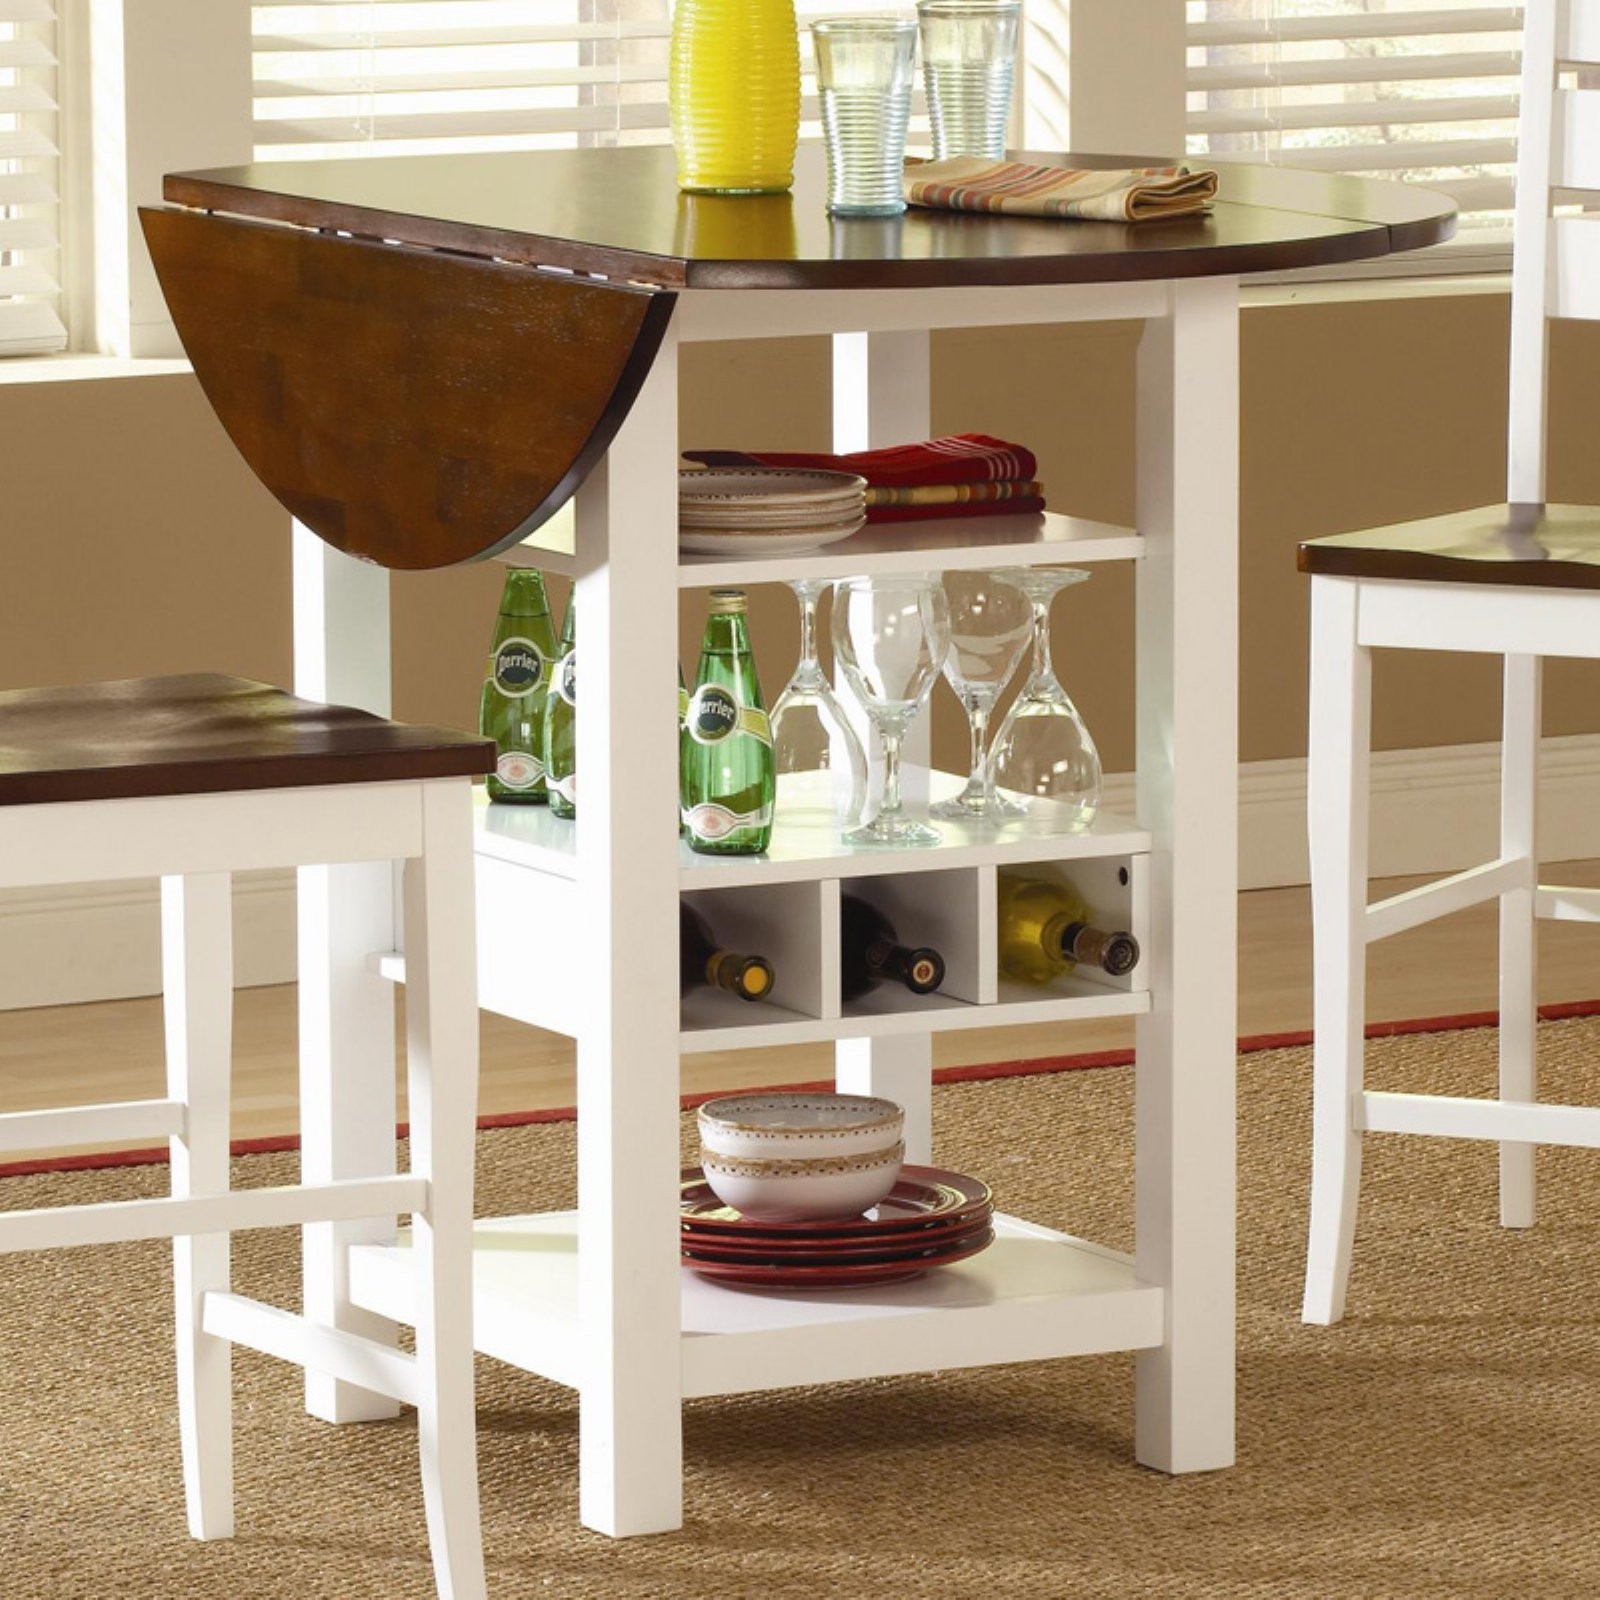 Ridgewood white round dining table with built in wine rack